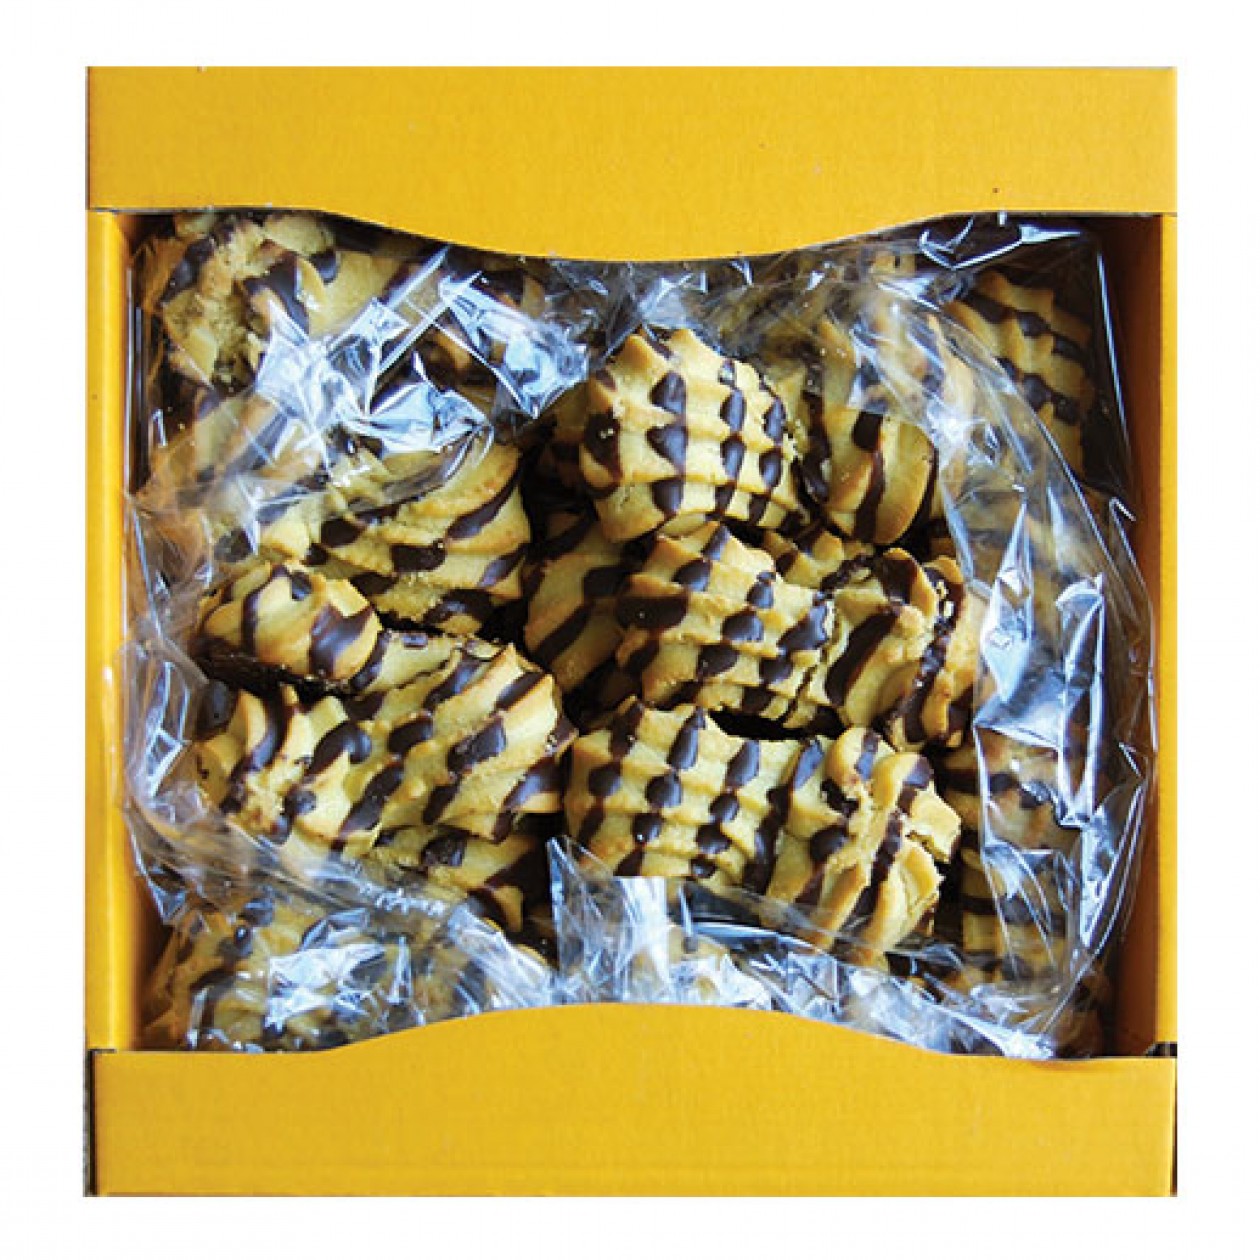 Polish Biscuit Cone Decorated with Chocolate (15) 1x400g